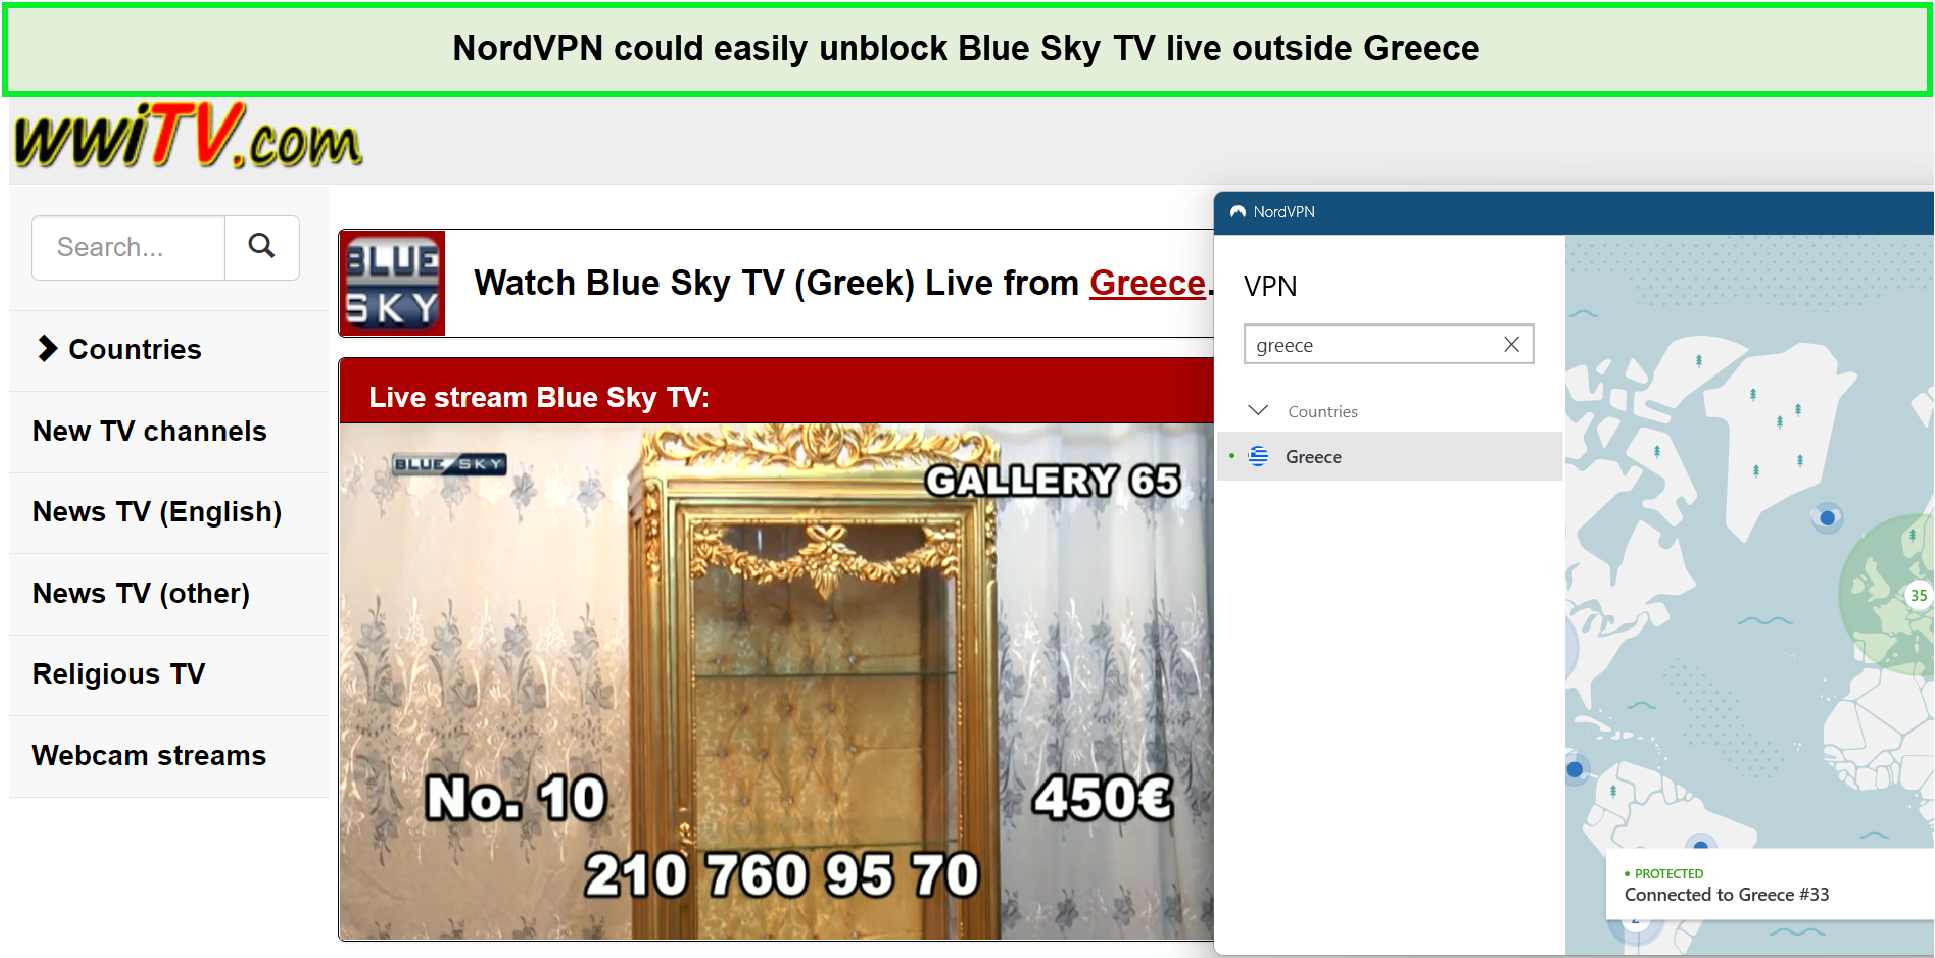 NordVPN-easily-unblock-Bly-Sky-TV-outside-Greece-For German Users